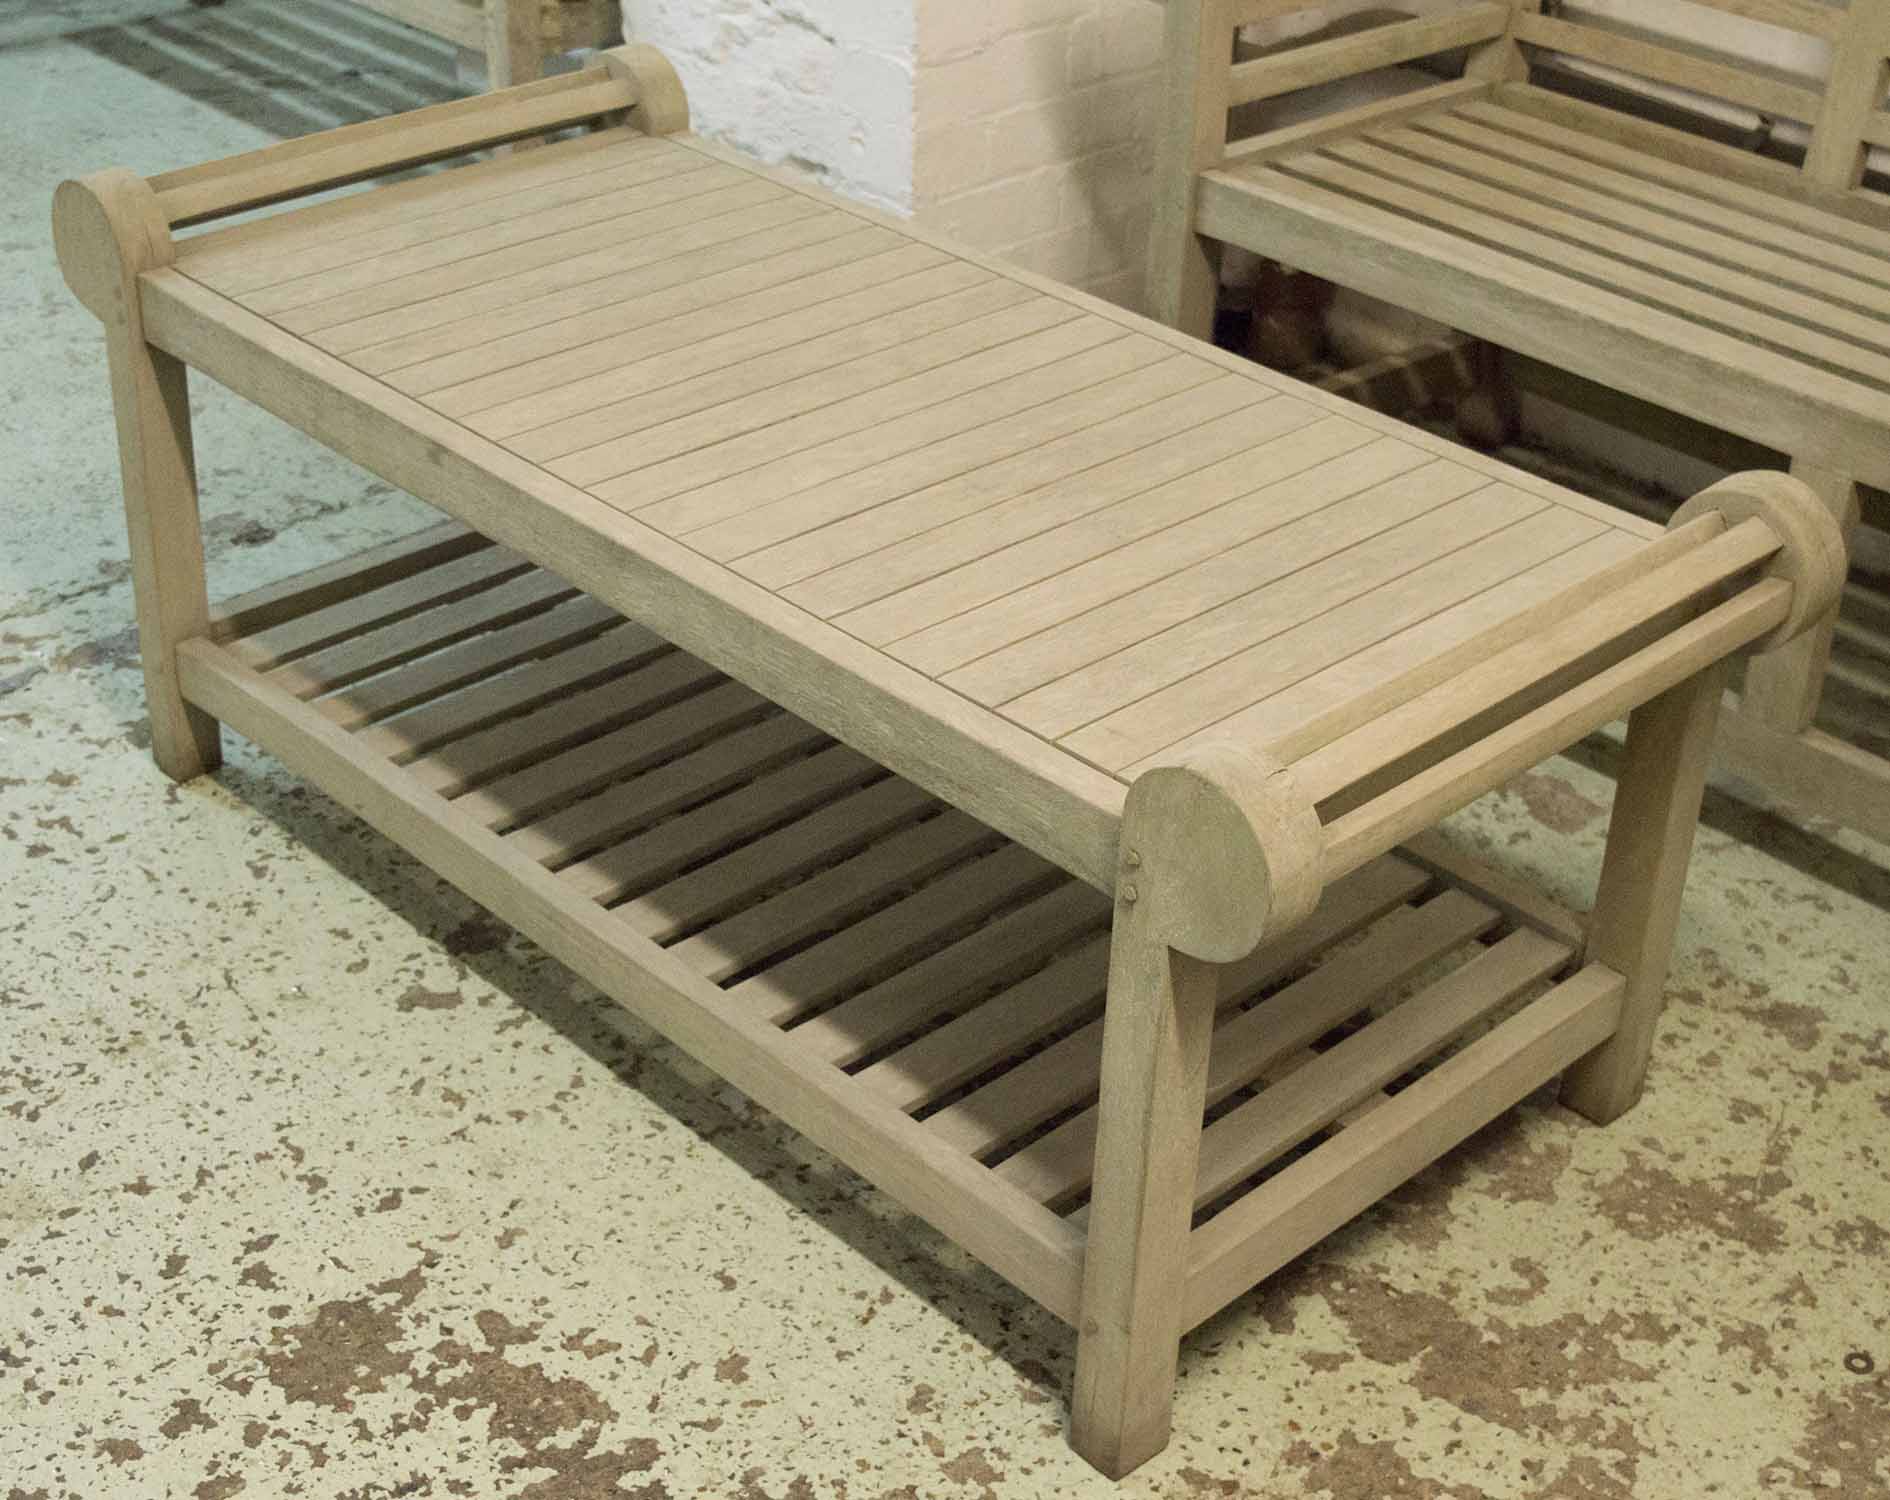 LUTYENS STYLE GARDEN BENCH AND TABLE, after a design by 